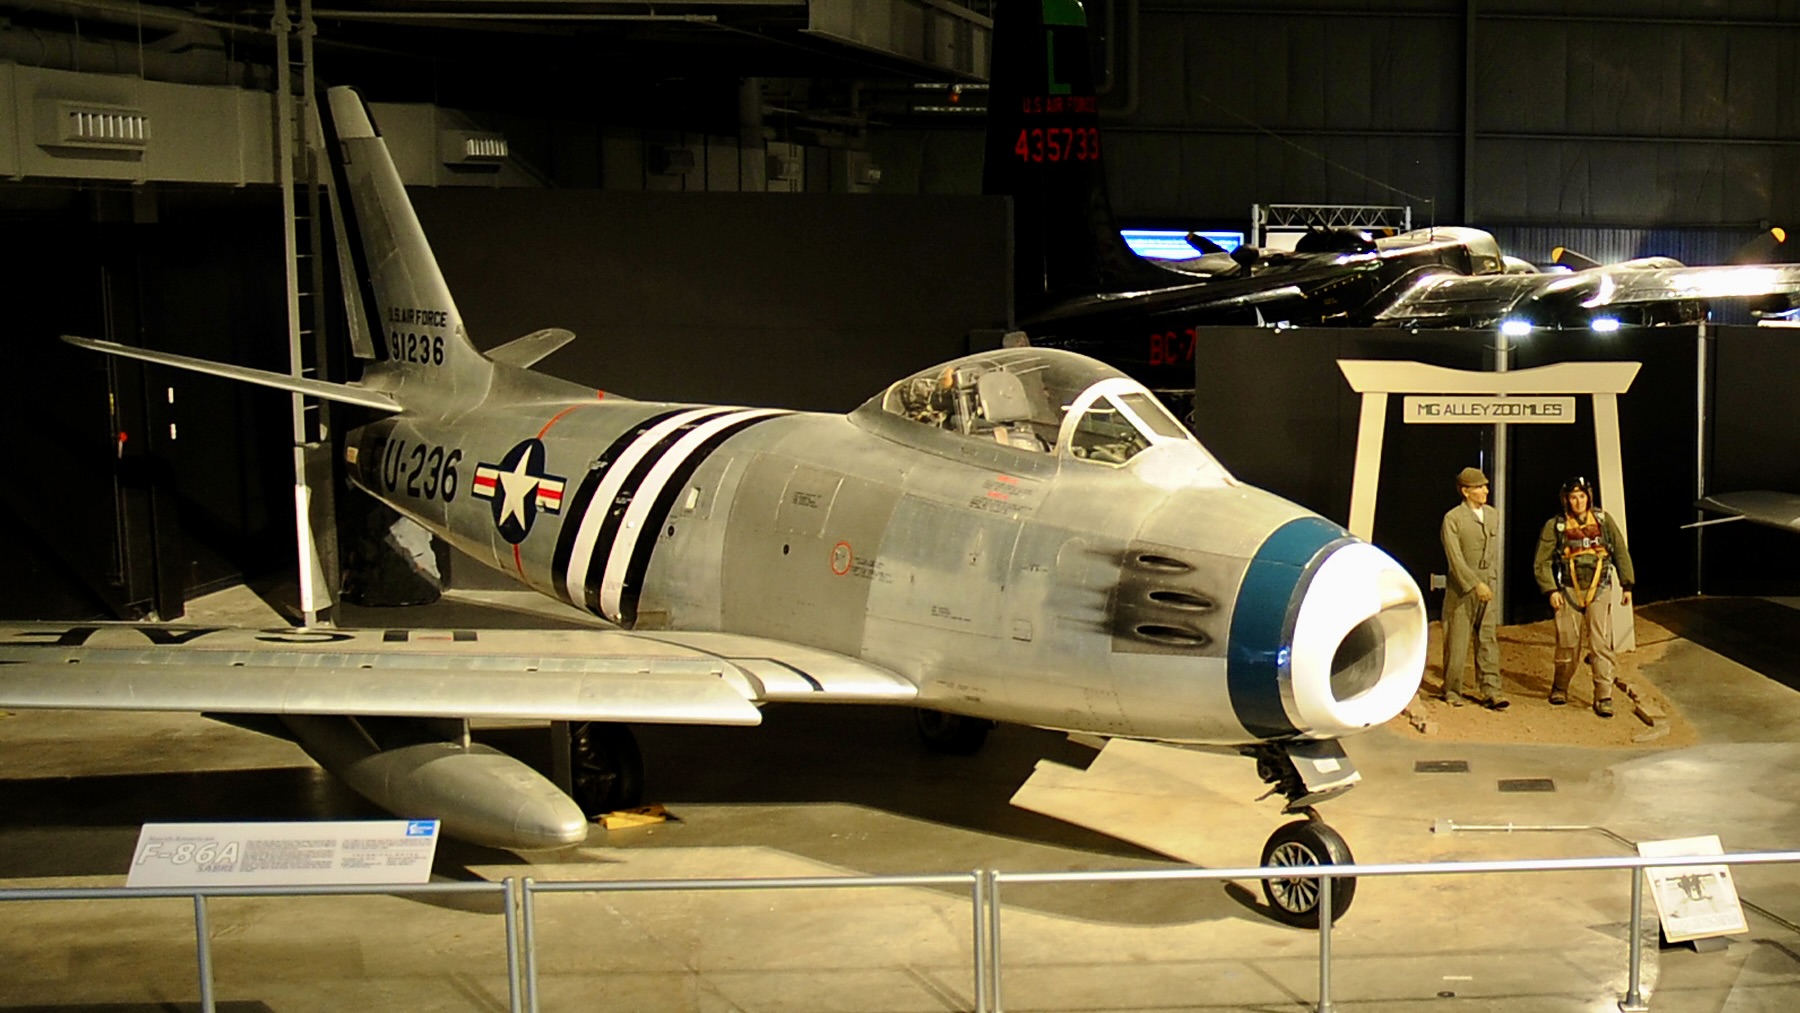 F-86 Sabre at the National Museum of the United States Air Force Dayton, OH.